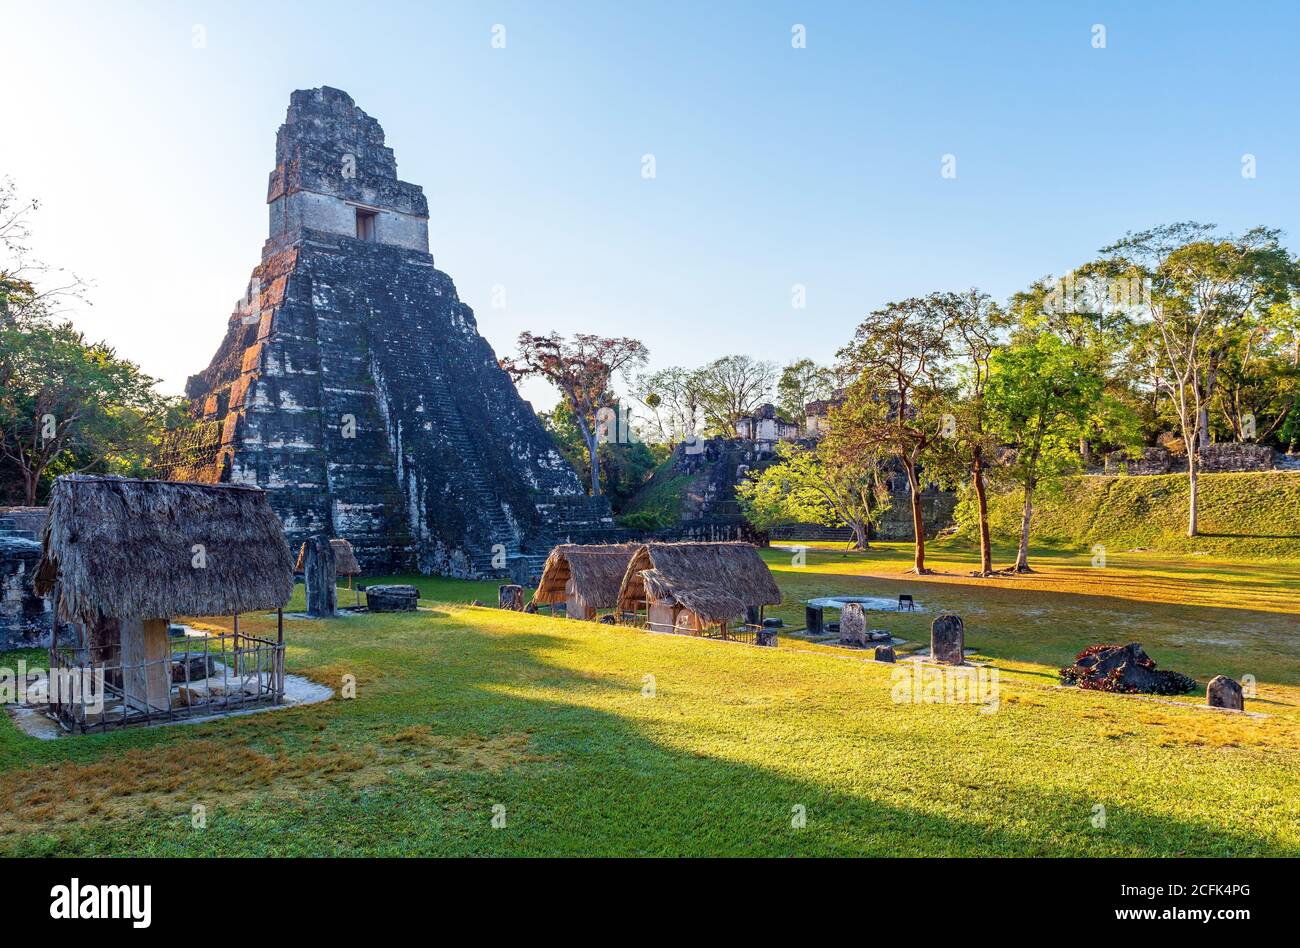 Main Square of the Mayan archaeological site of Tikal with Temple I or Temple of the Great Jaguar Pyramid on the left, Peten Rainforest, Guatemala. Stock Photo